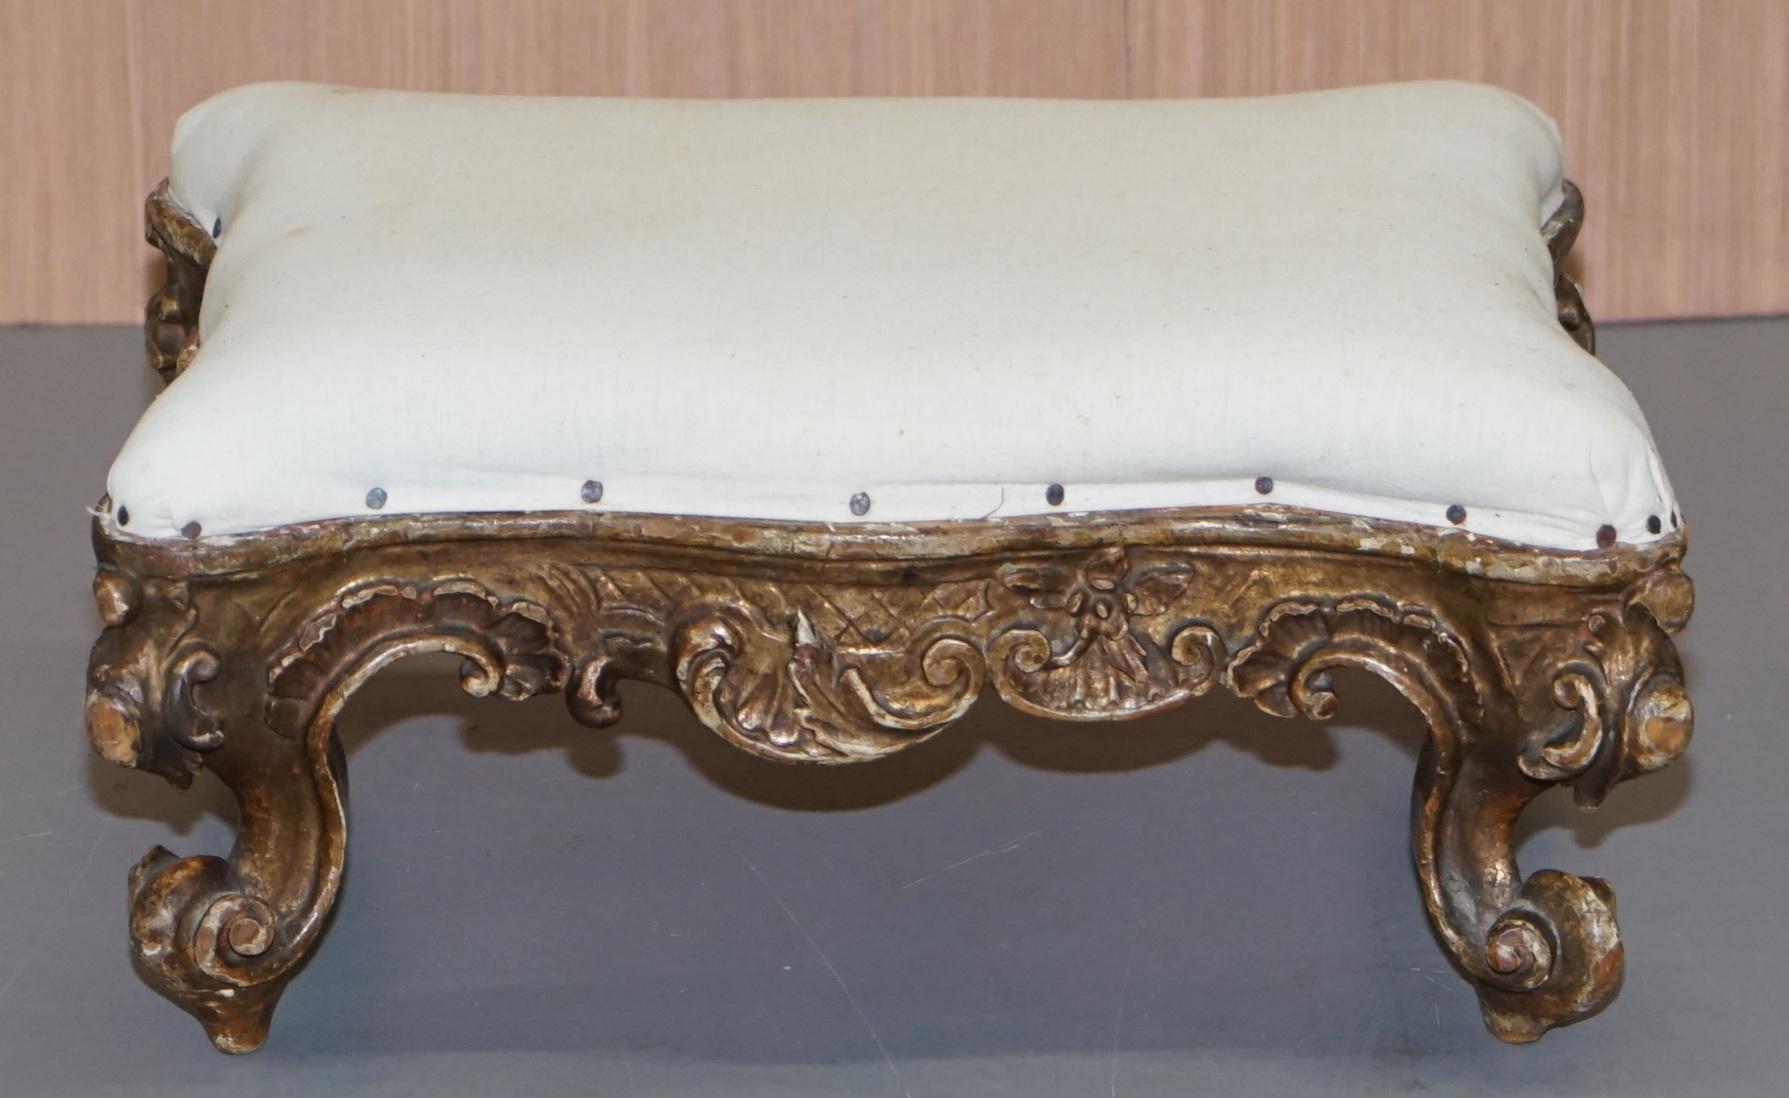 We are delighted to offer for sale this stunning small giltwood Victorian footstool hand carved all over

A good looking and well made piece with period gilt wood, its been stripped lined and is ready for upholstery. This can be upholstered in a